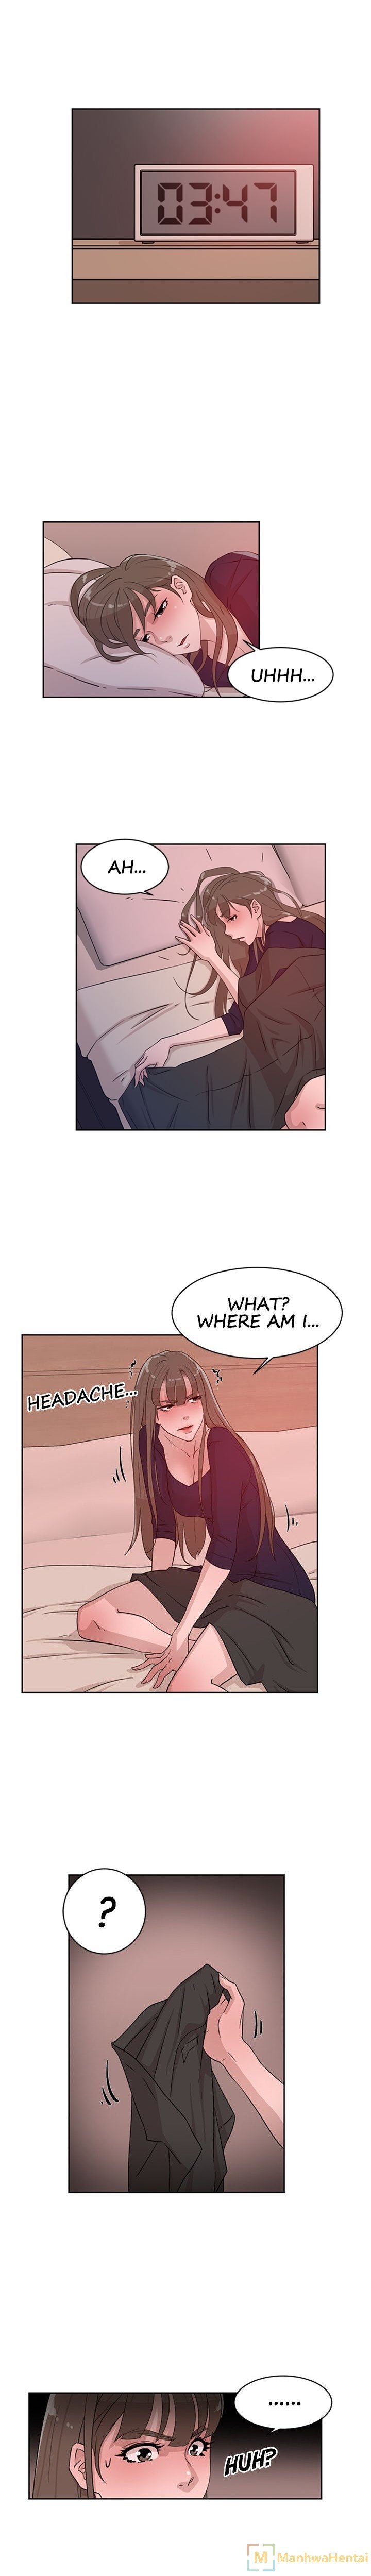 office-affairs-chap-32-1